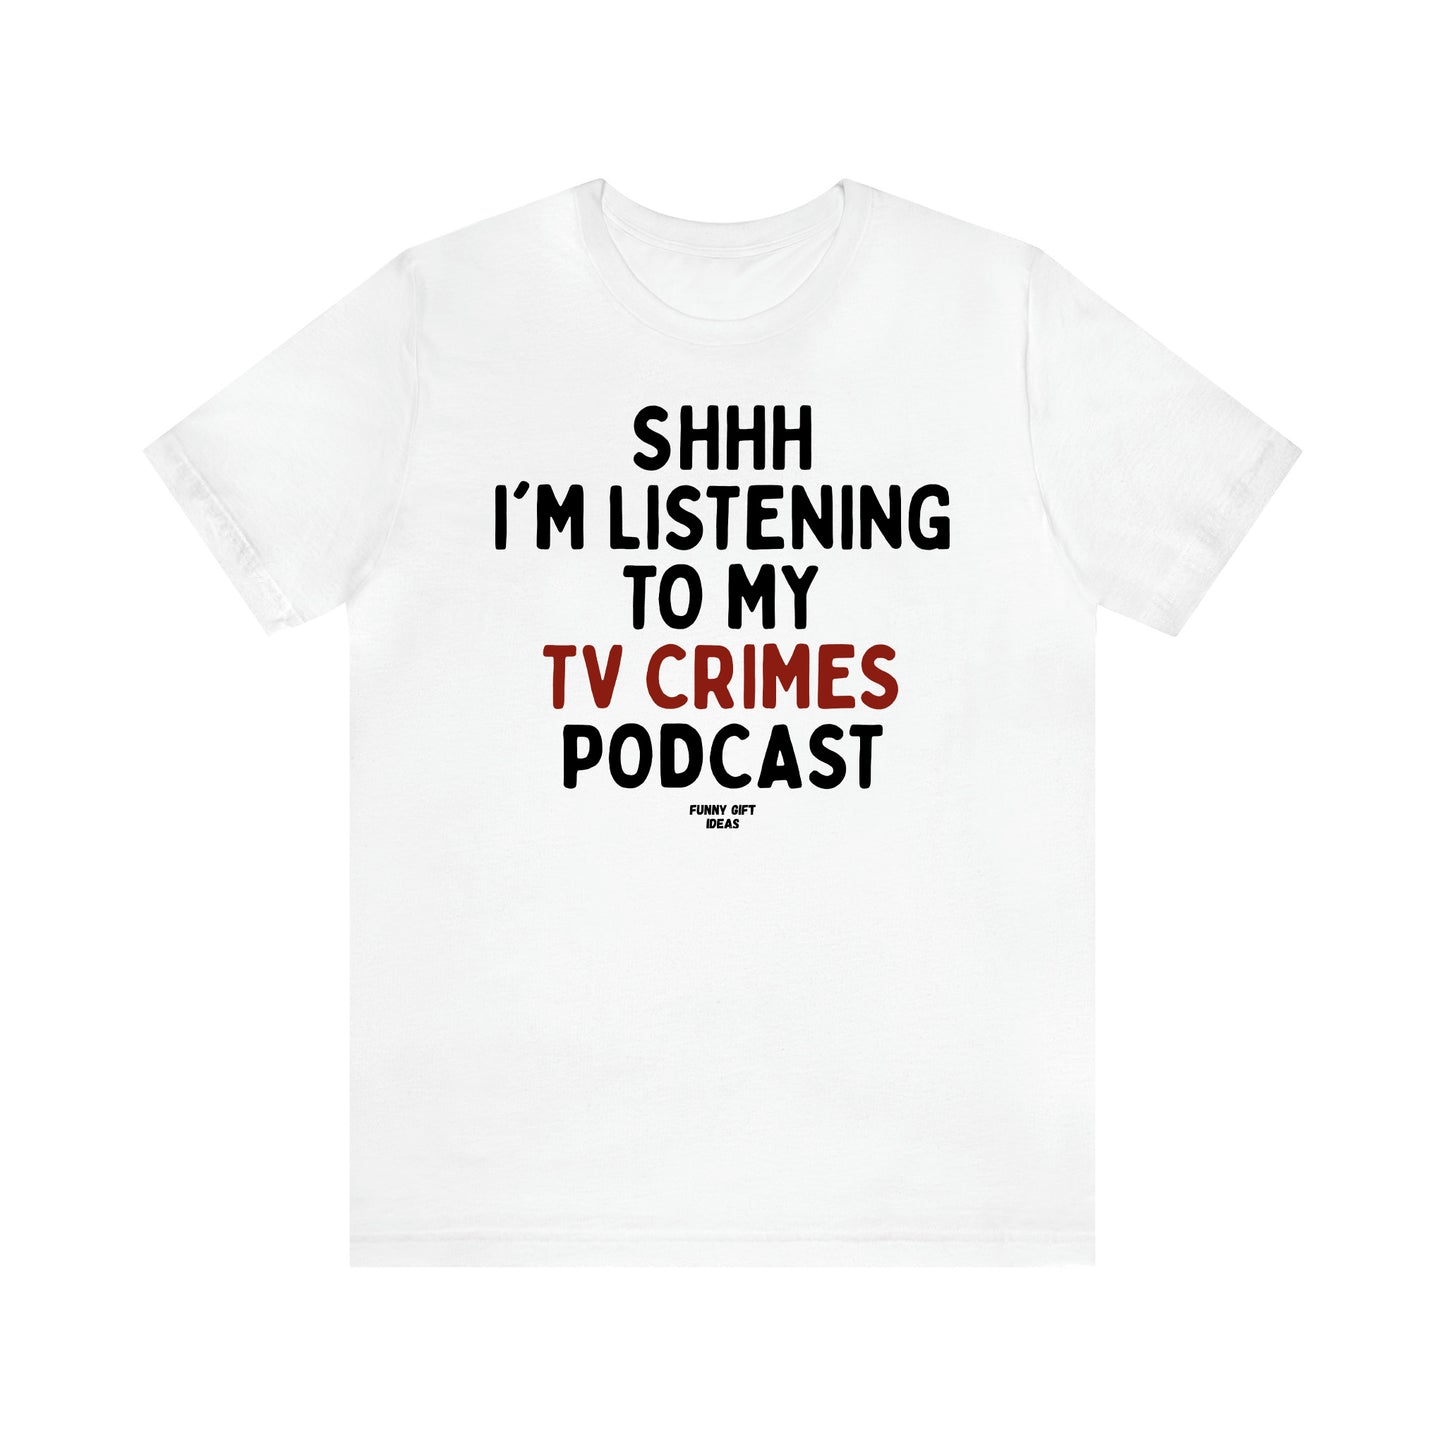 Women's T Shirts Shhh I'm Listening to My True Crime Podcast - Funny Gift Ideas